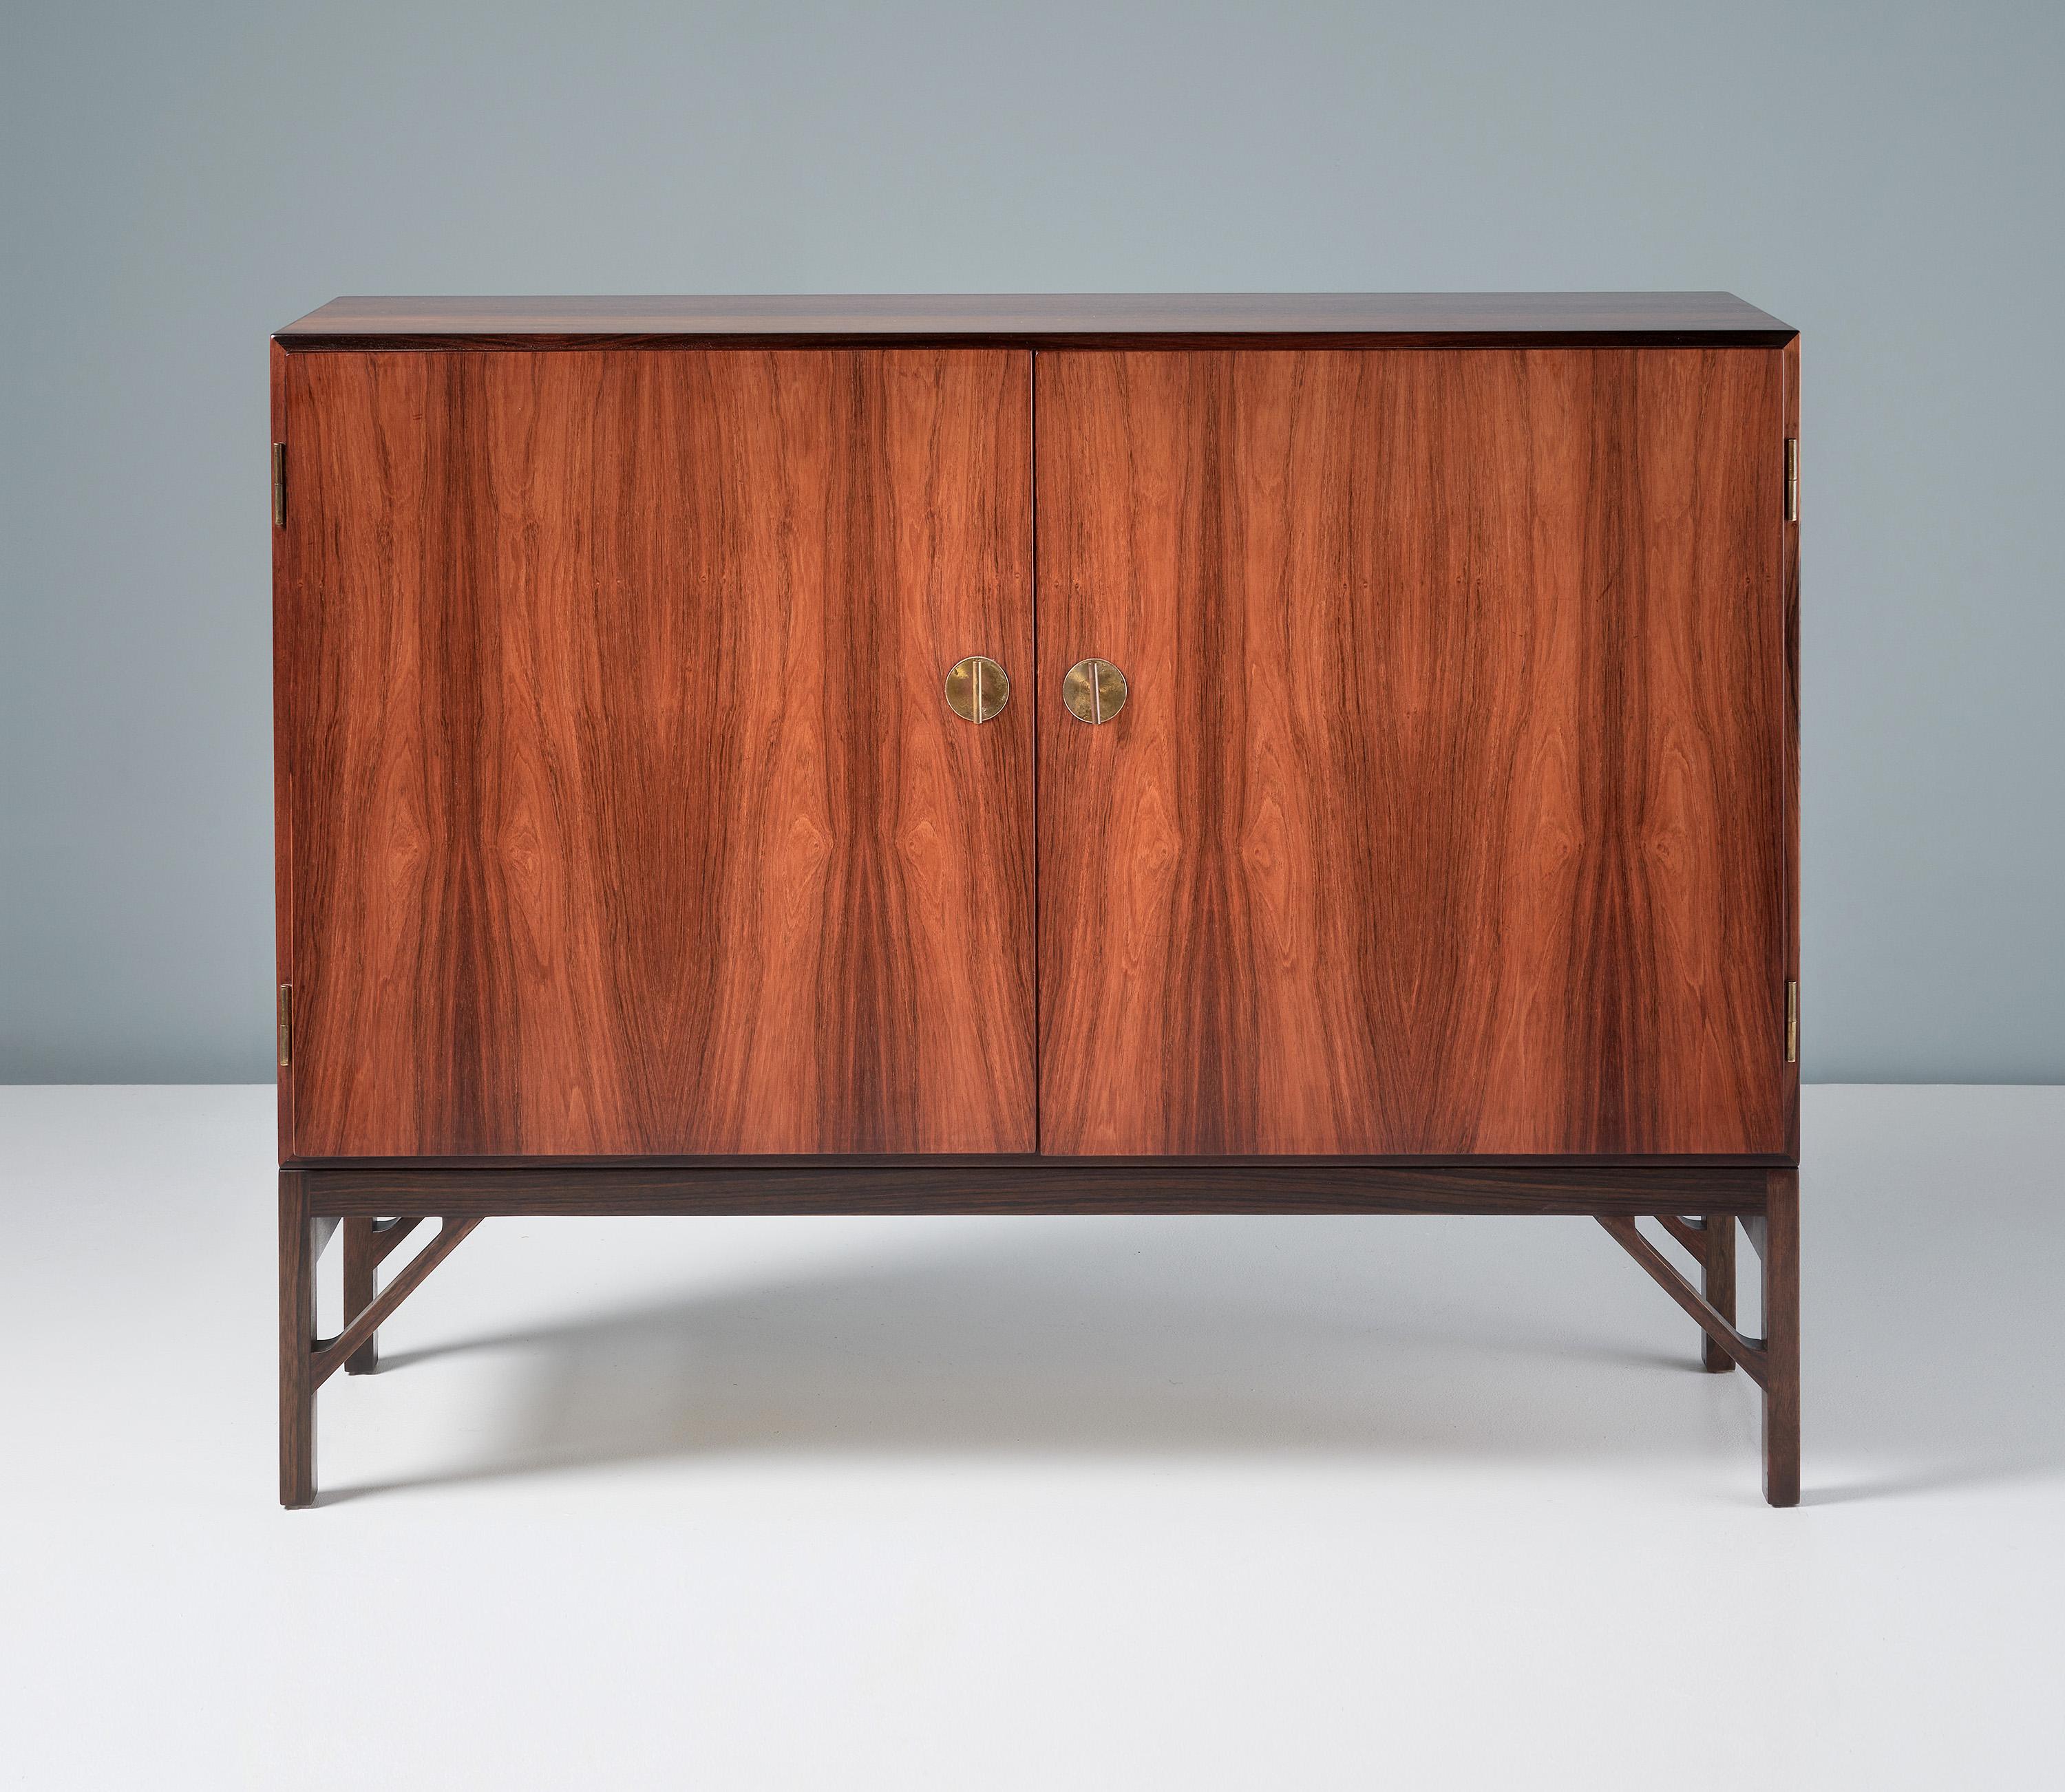 Borge Mogensen - Model A 232 Cabinet

Rarely seen rosewood version of Mogensen's iconic cabinet design. The front has two doors with Chinese style decorative brass T-Bar keys. The interior is lined with Maple wood veneer and solid maple shelves and